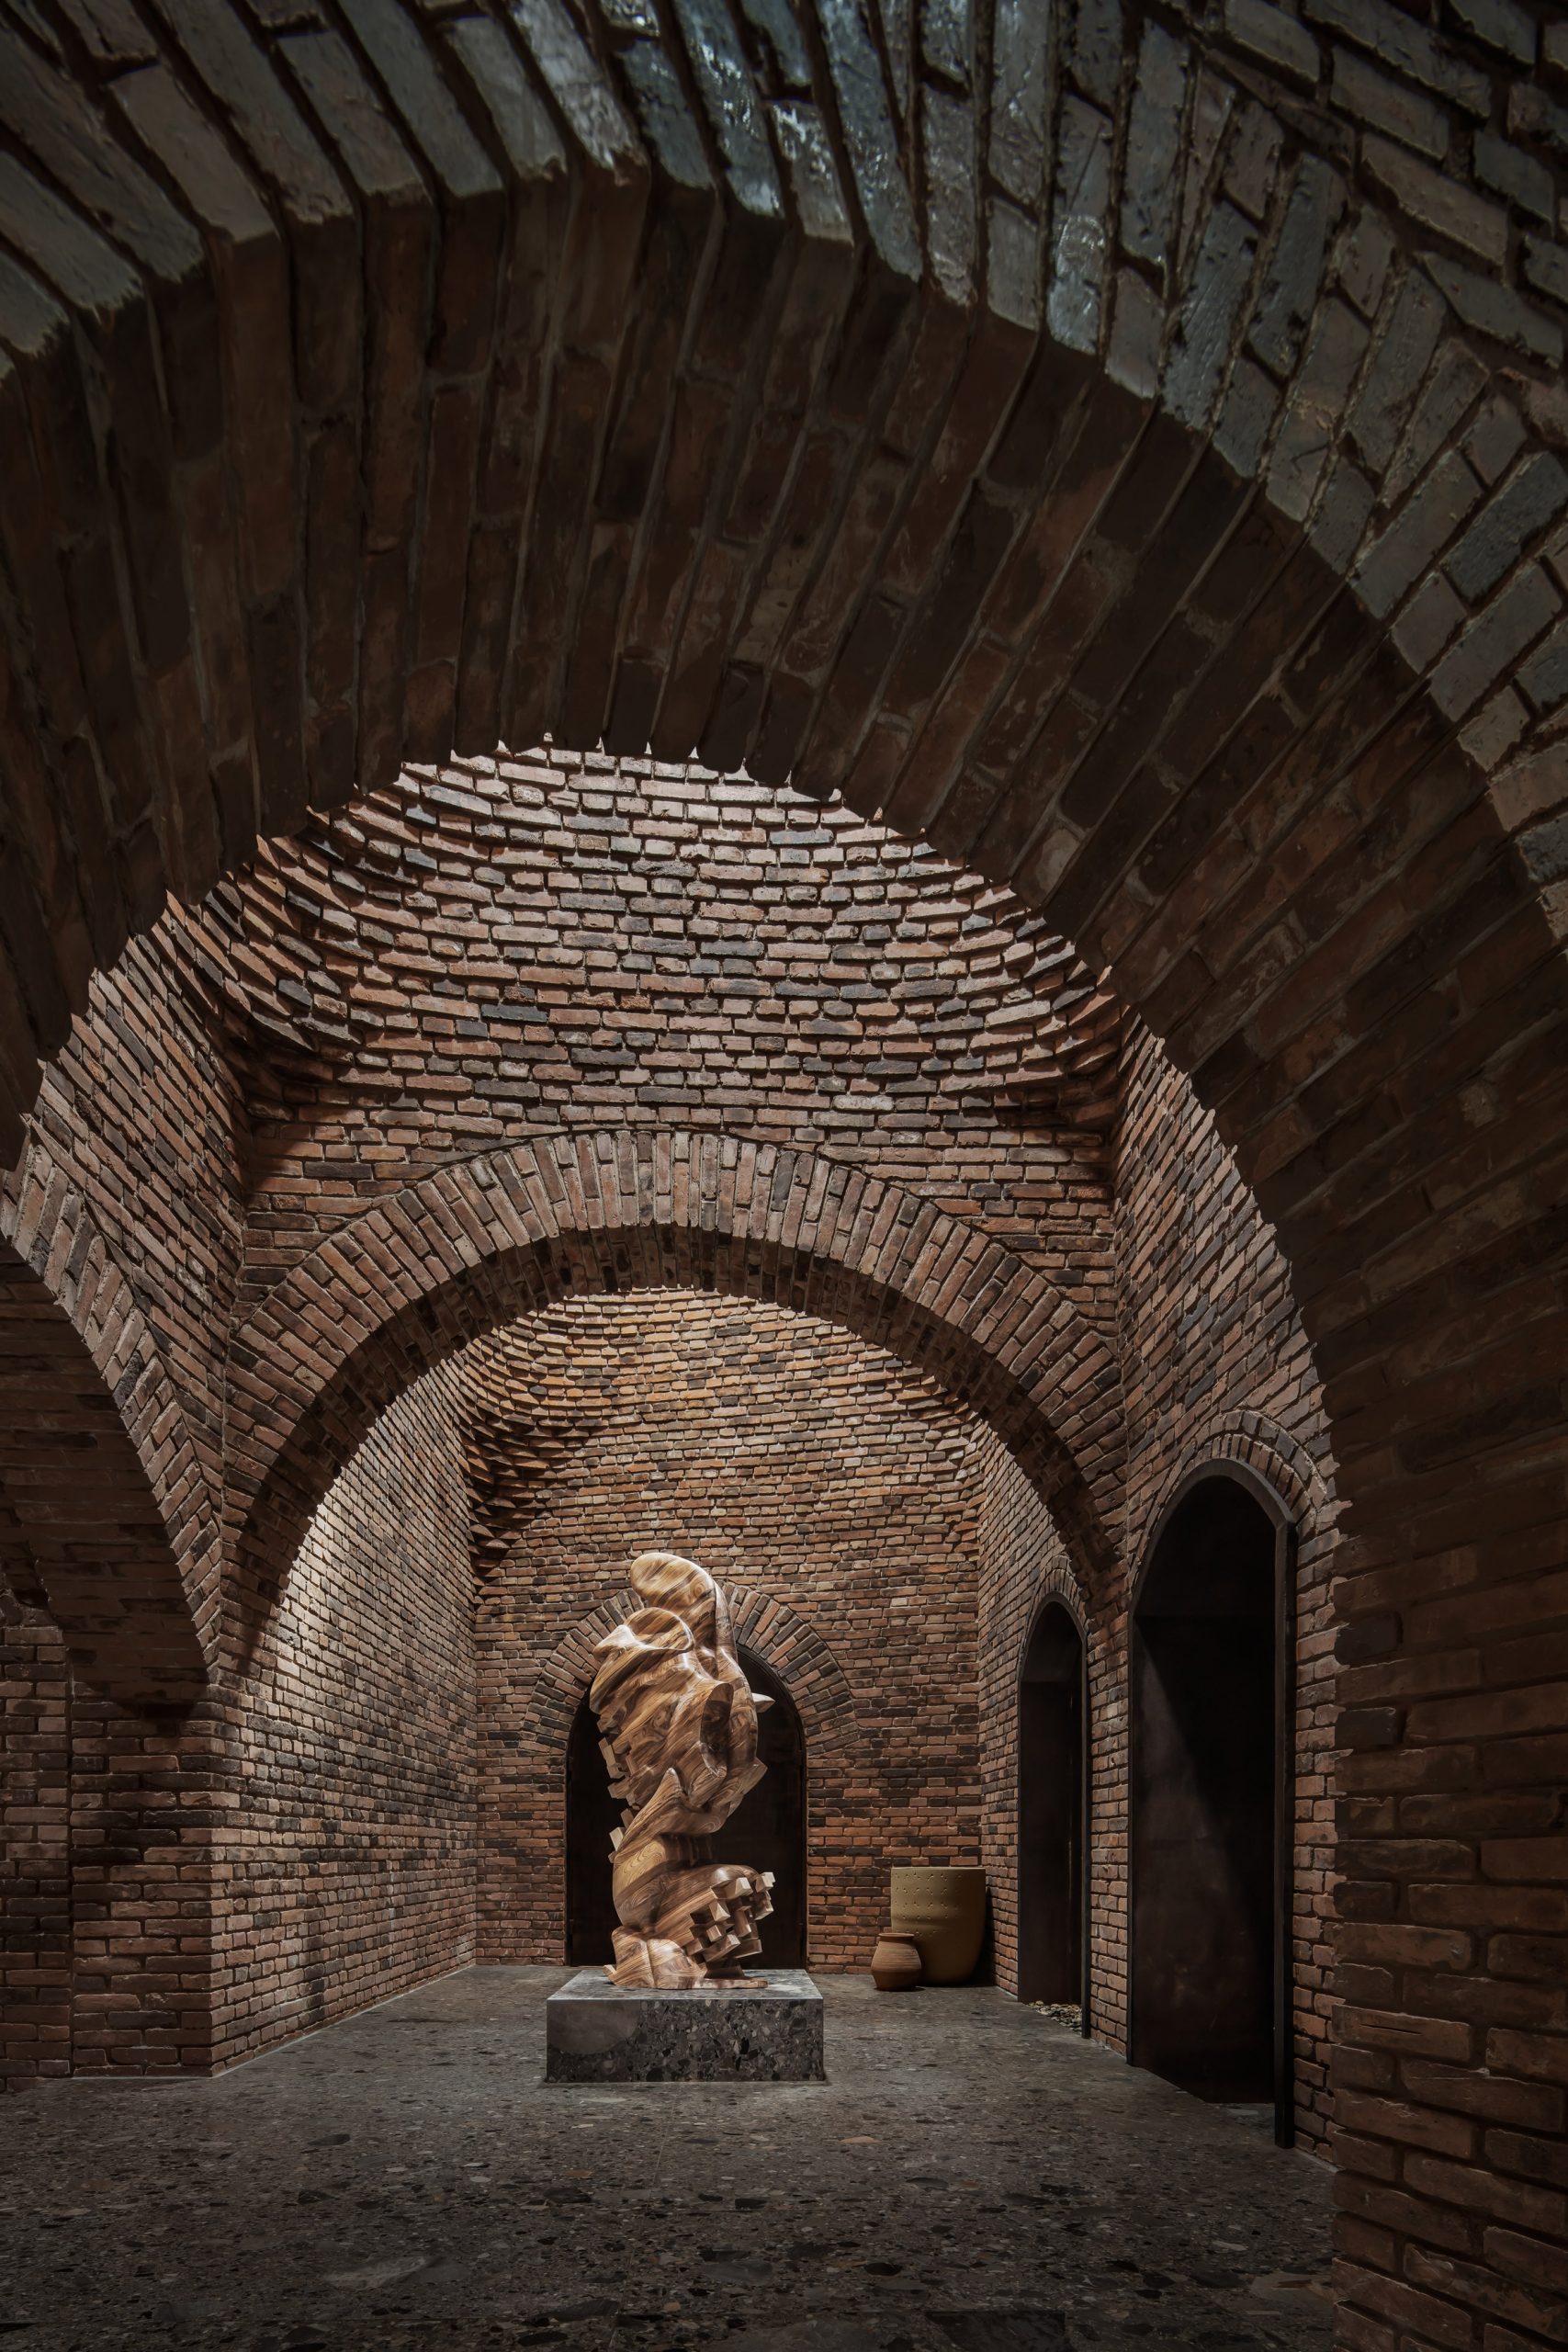 A sculpture within an arched-brick corridor